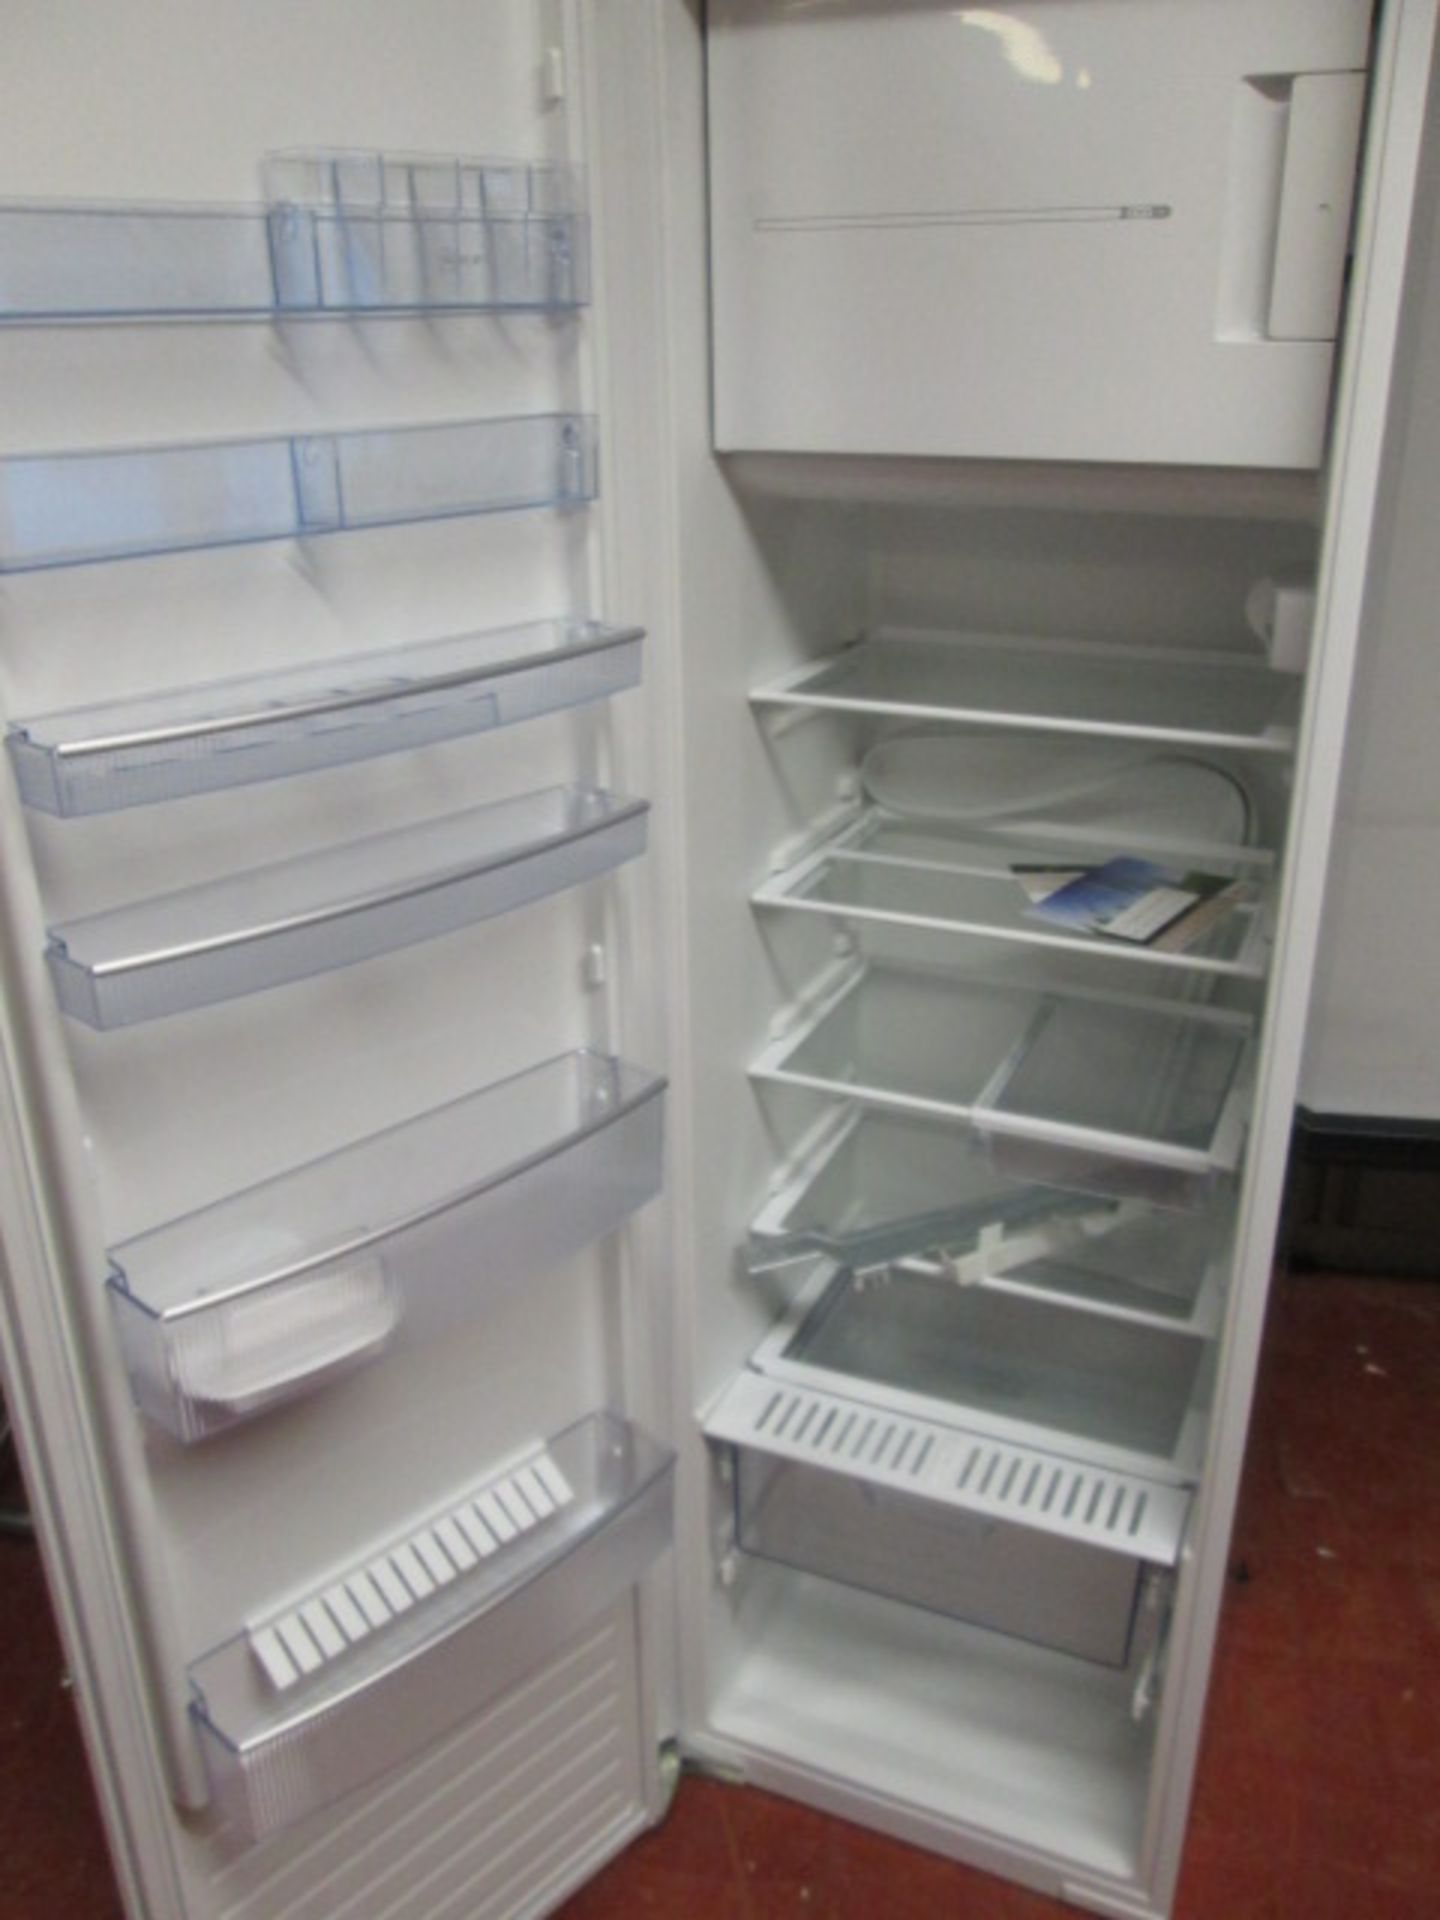 Neff Integrated Fridge with Ice Box, Model FD9012 with Installation and Operating Instructions, 1780 - Image 2 of 4